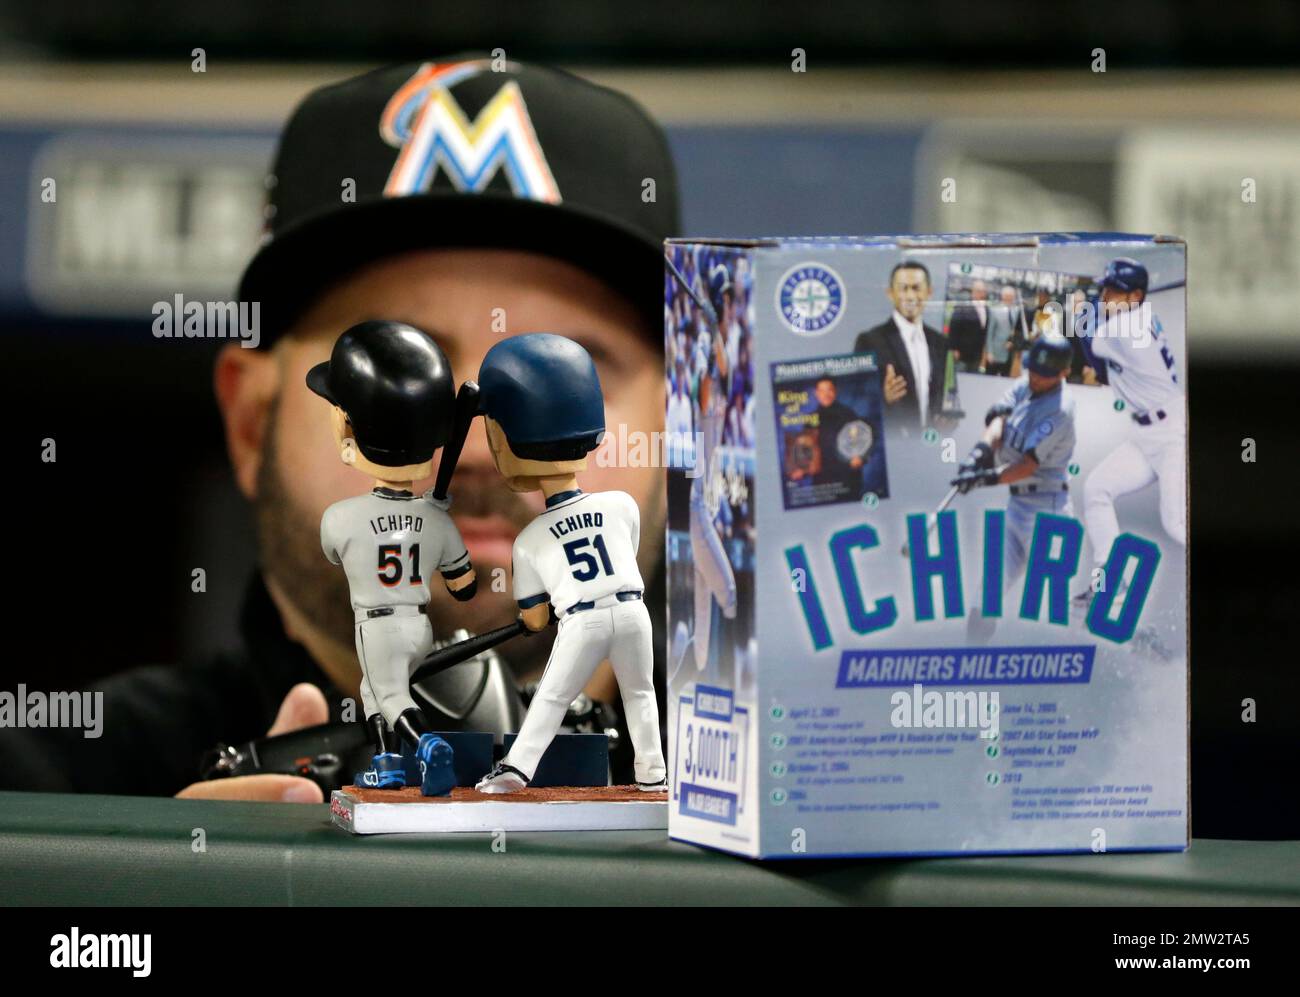 A dual bobble head showing Miami Marlins' Ichiro Suzuki wearing a Marlins  jersey and a jersey from his former team, the Seattle Mariners, and  commemorating his 3,000-hit milestone, is shown before a